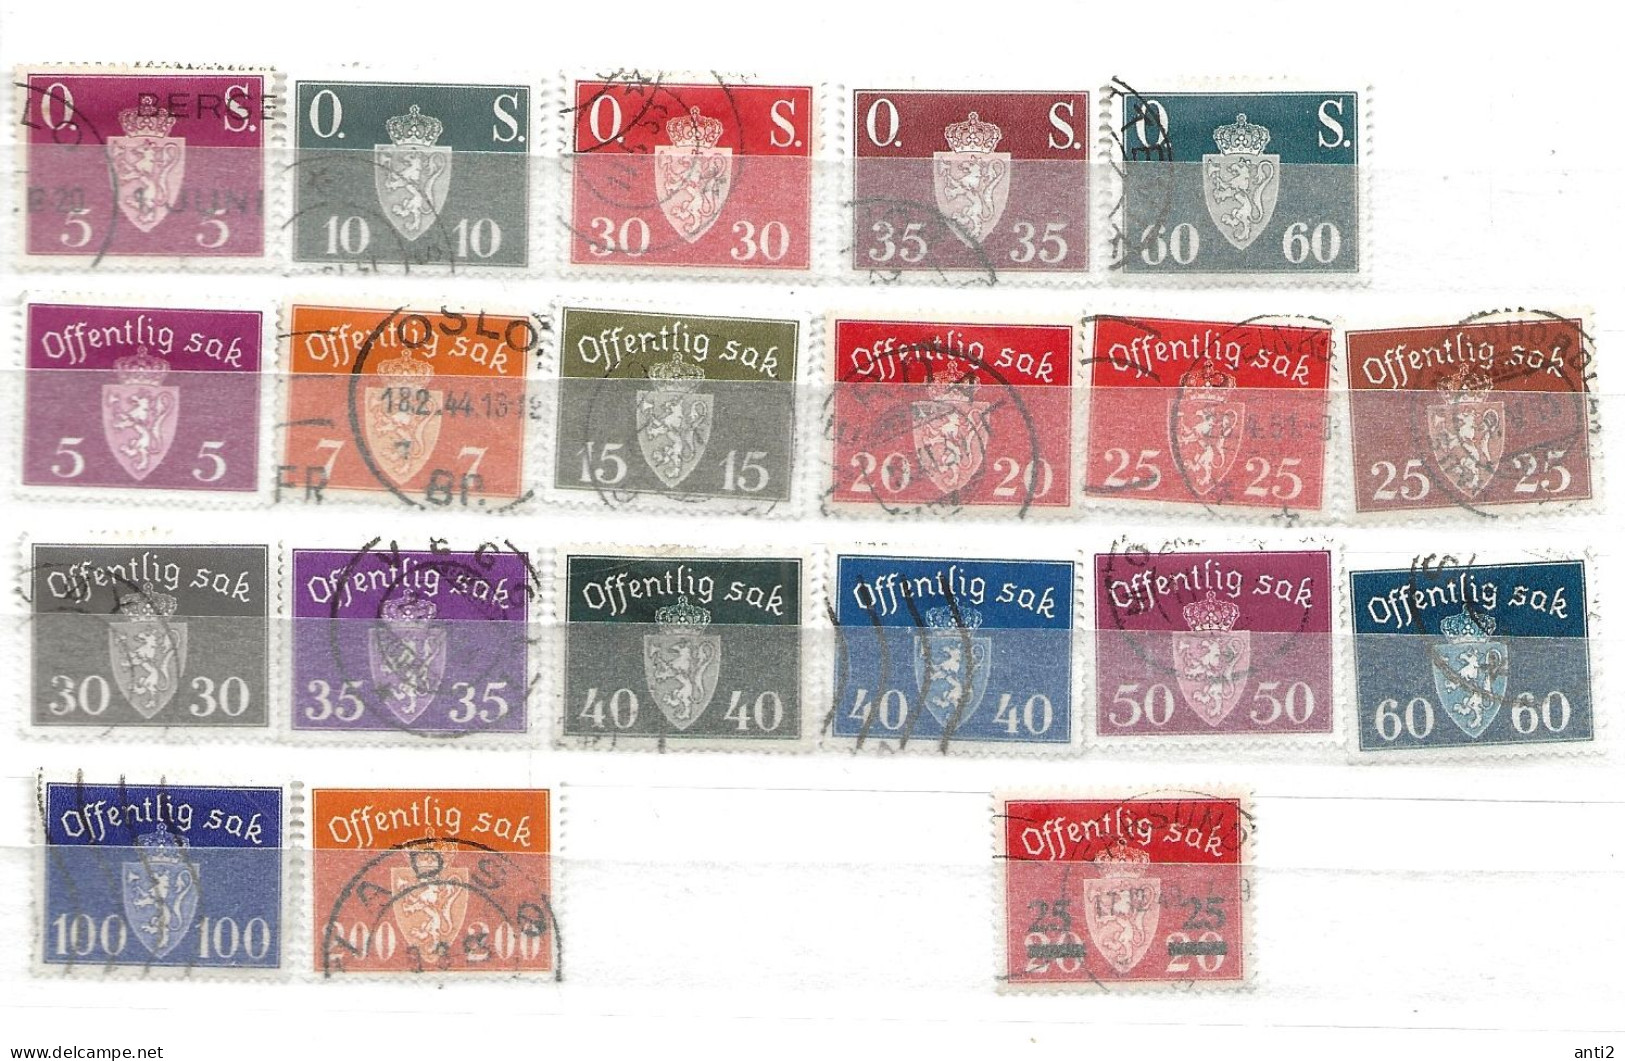 Norway Small Collectionused Stamps,  Over 200 Different Stamps Many Sets, Cancelled Stamps - Collezioni